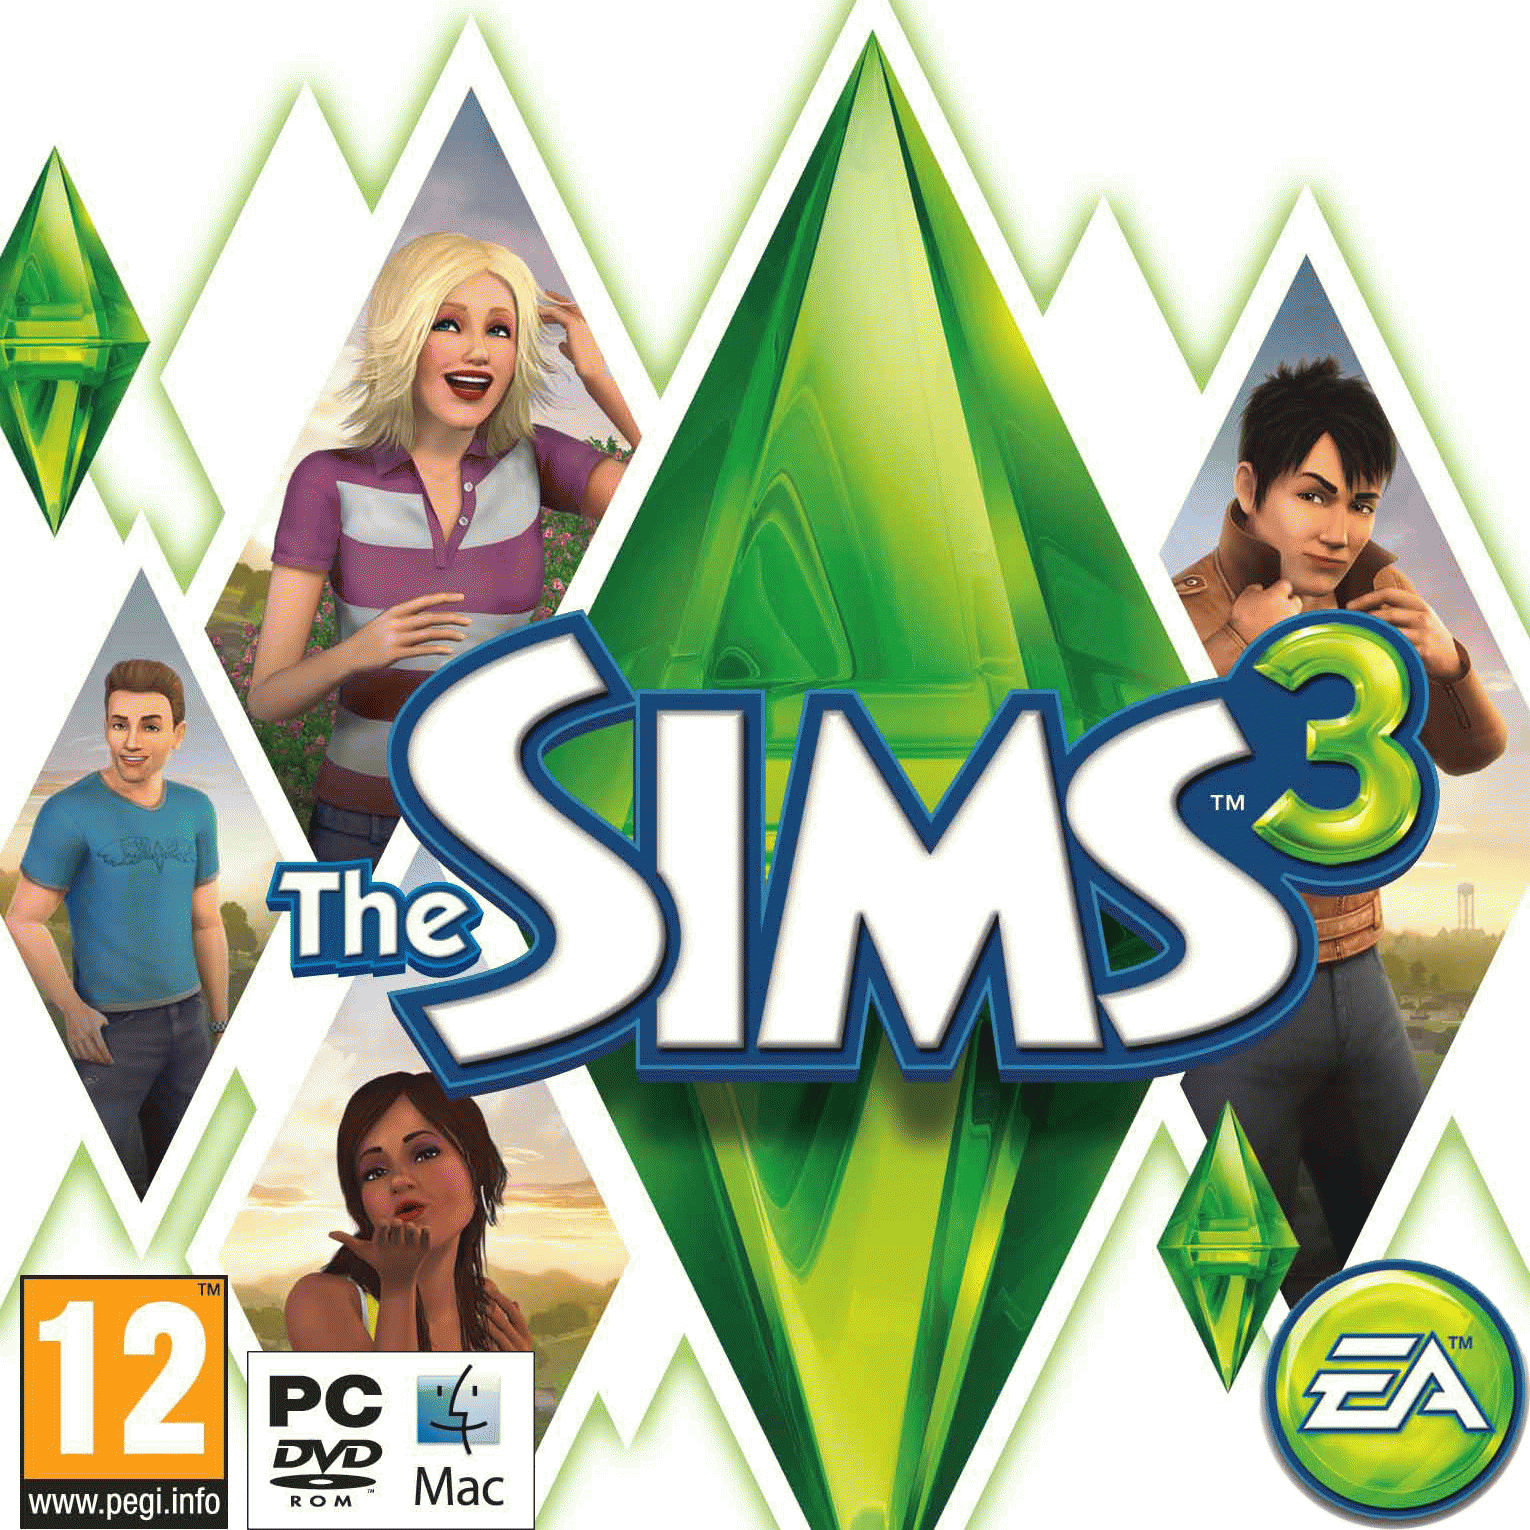 The Sims 3: The Complete Collection [1.67.2.024017] (2009-2013) PC | RePack by xatab